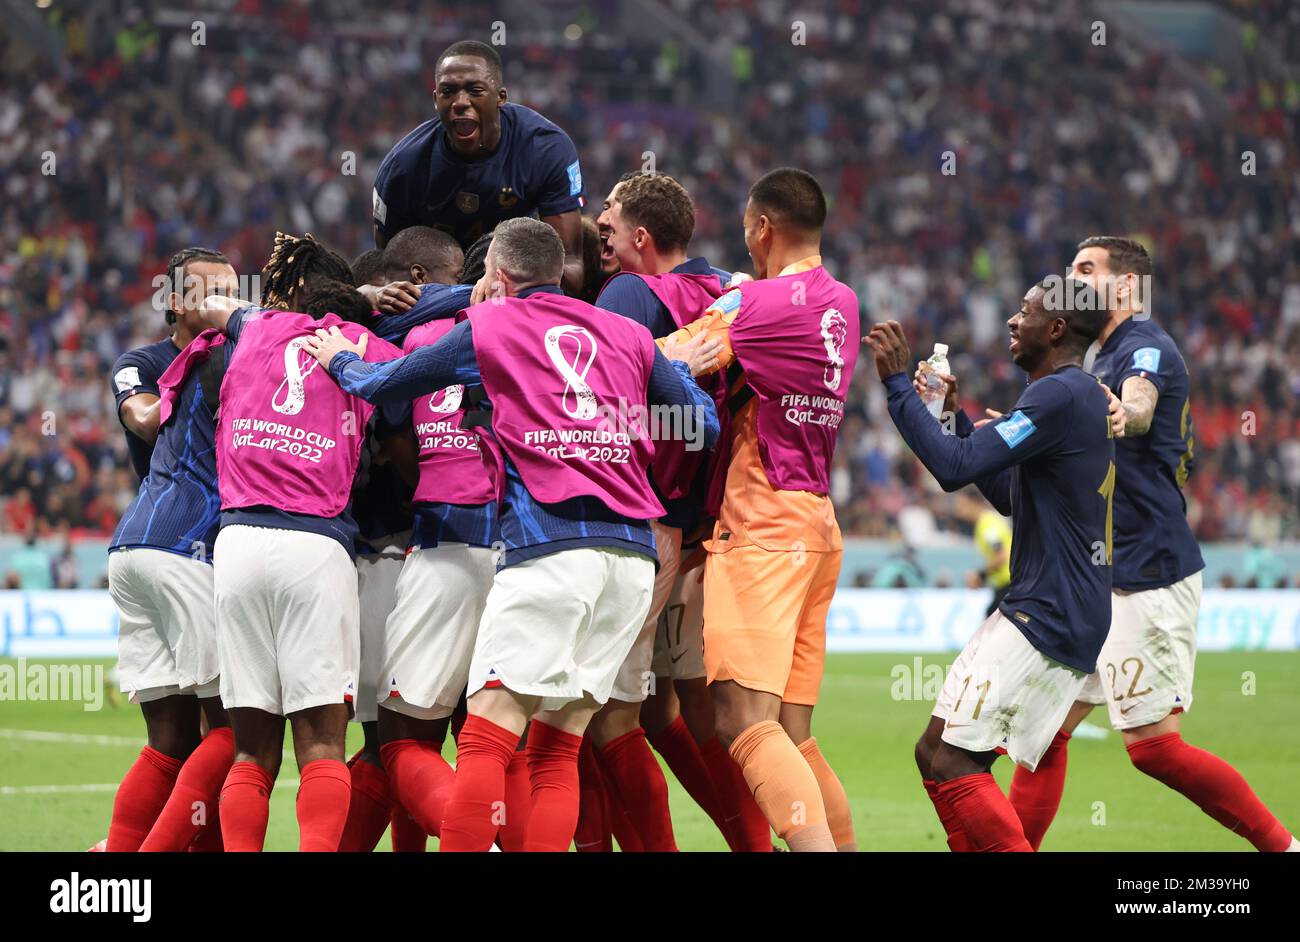 Al Khor, Qatar. 14th Dec, 2022. Players of France celebrate Randal Kolo Muani's goal during the Semifinal match between France and Morocco of the 2022 FIFA World Cup at Al Bayt Stadium in Al Khor, Qatar, Dec. 14, 2022. Credit: Cao Can/Xinhua/Alamy Live News Stock Photo